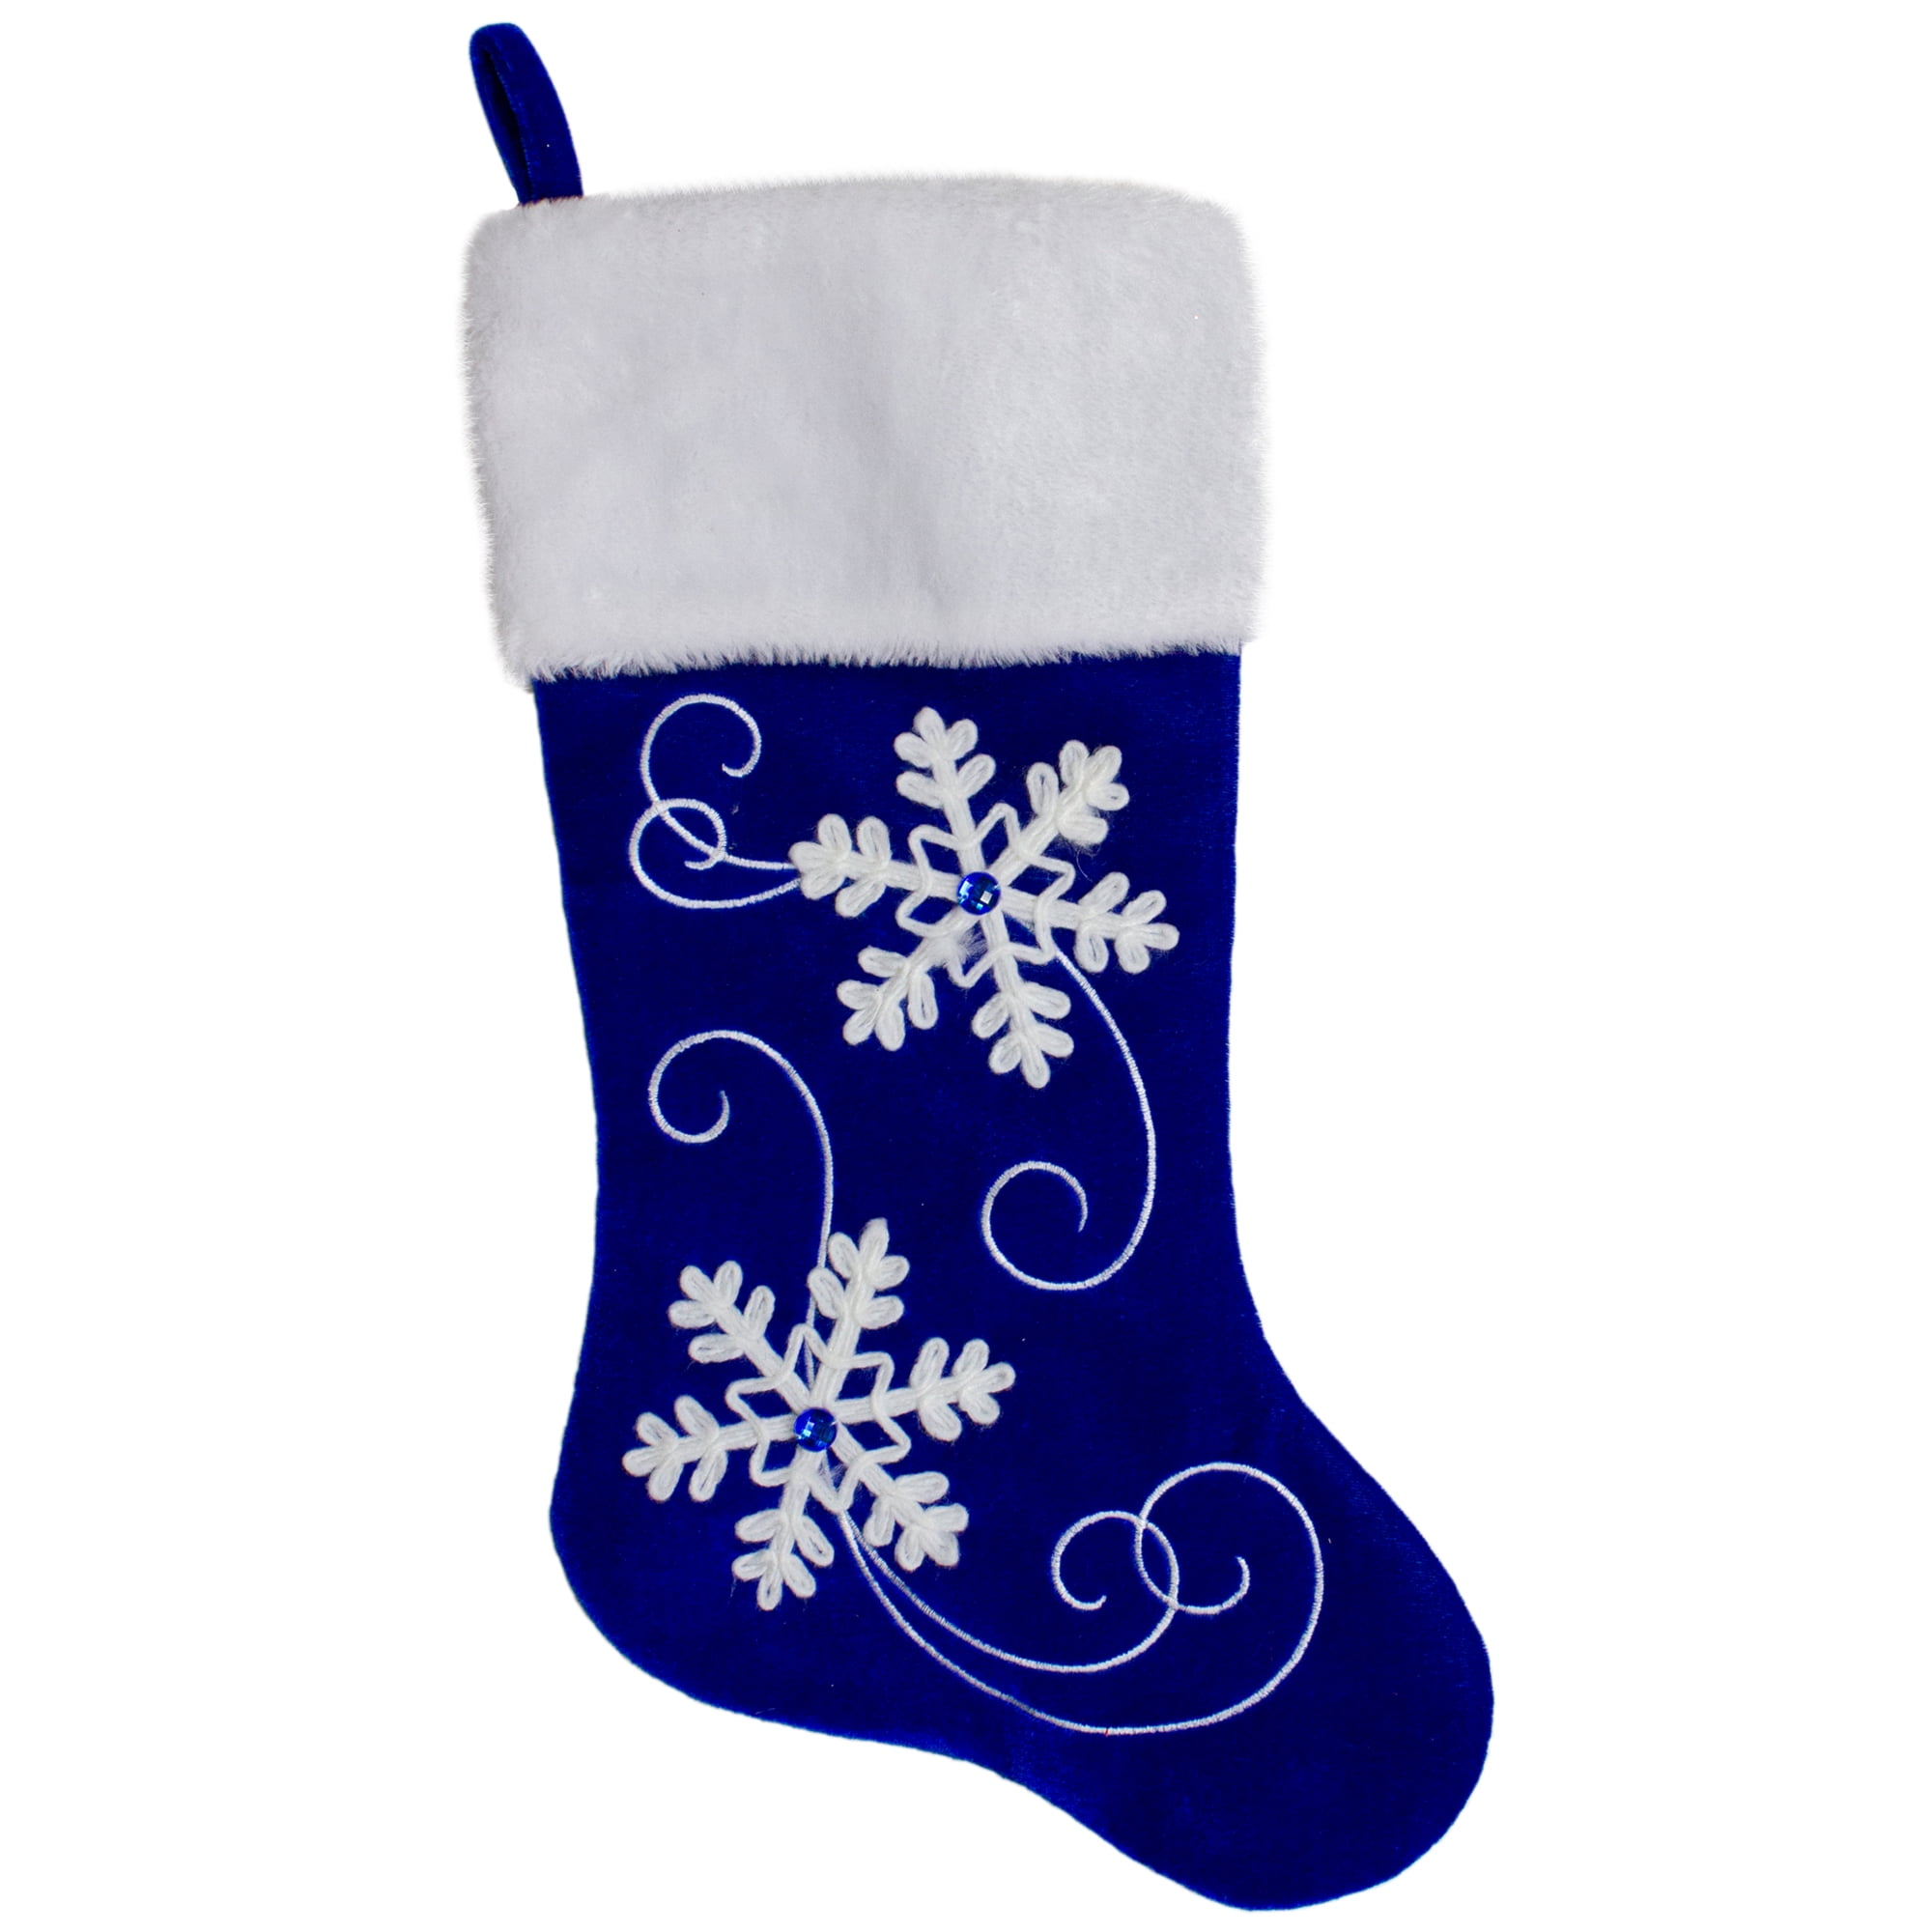 New Snowflake Christmas Stocking Knit  20" Long Green blue and white color 